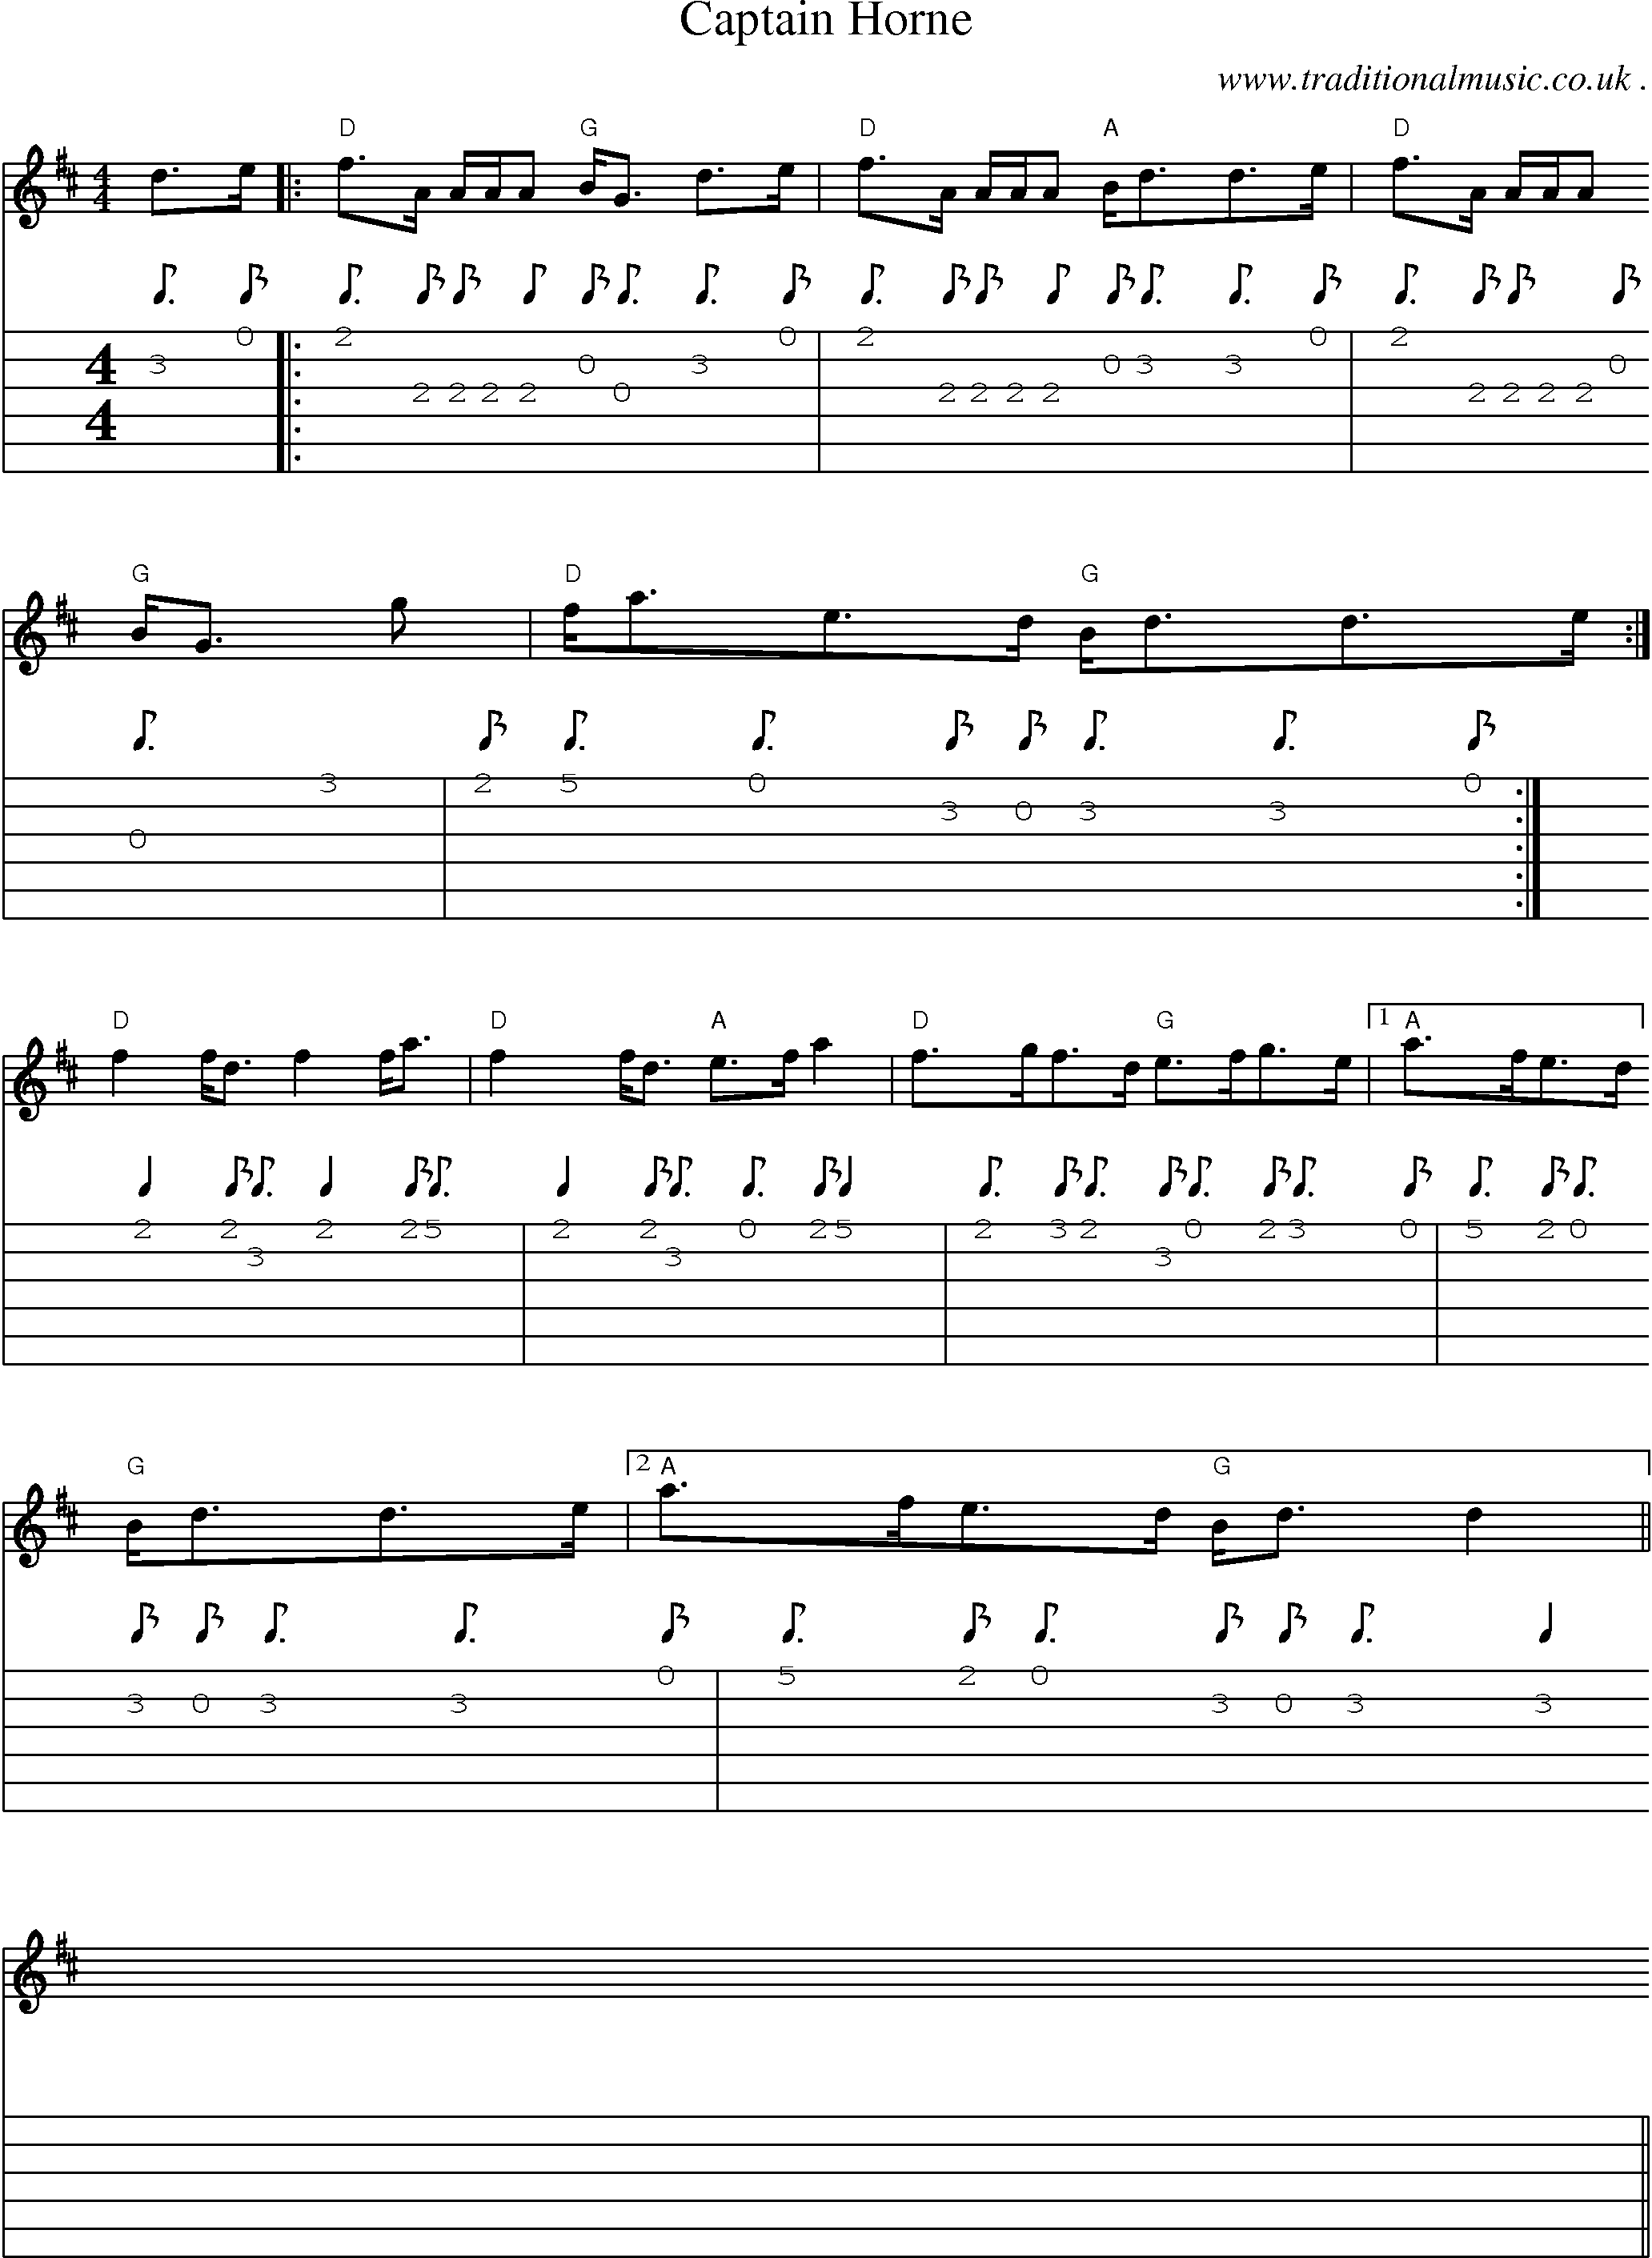 Sheet-music  score, Chords and Guitar Tabs for Captain Horne